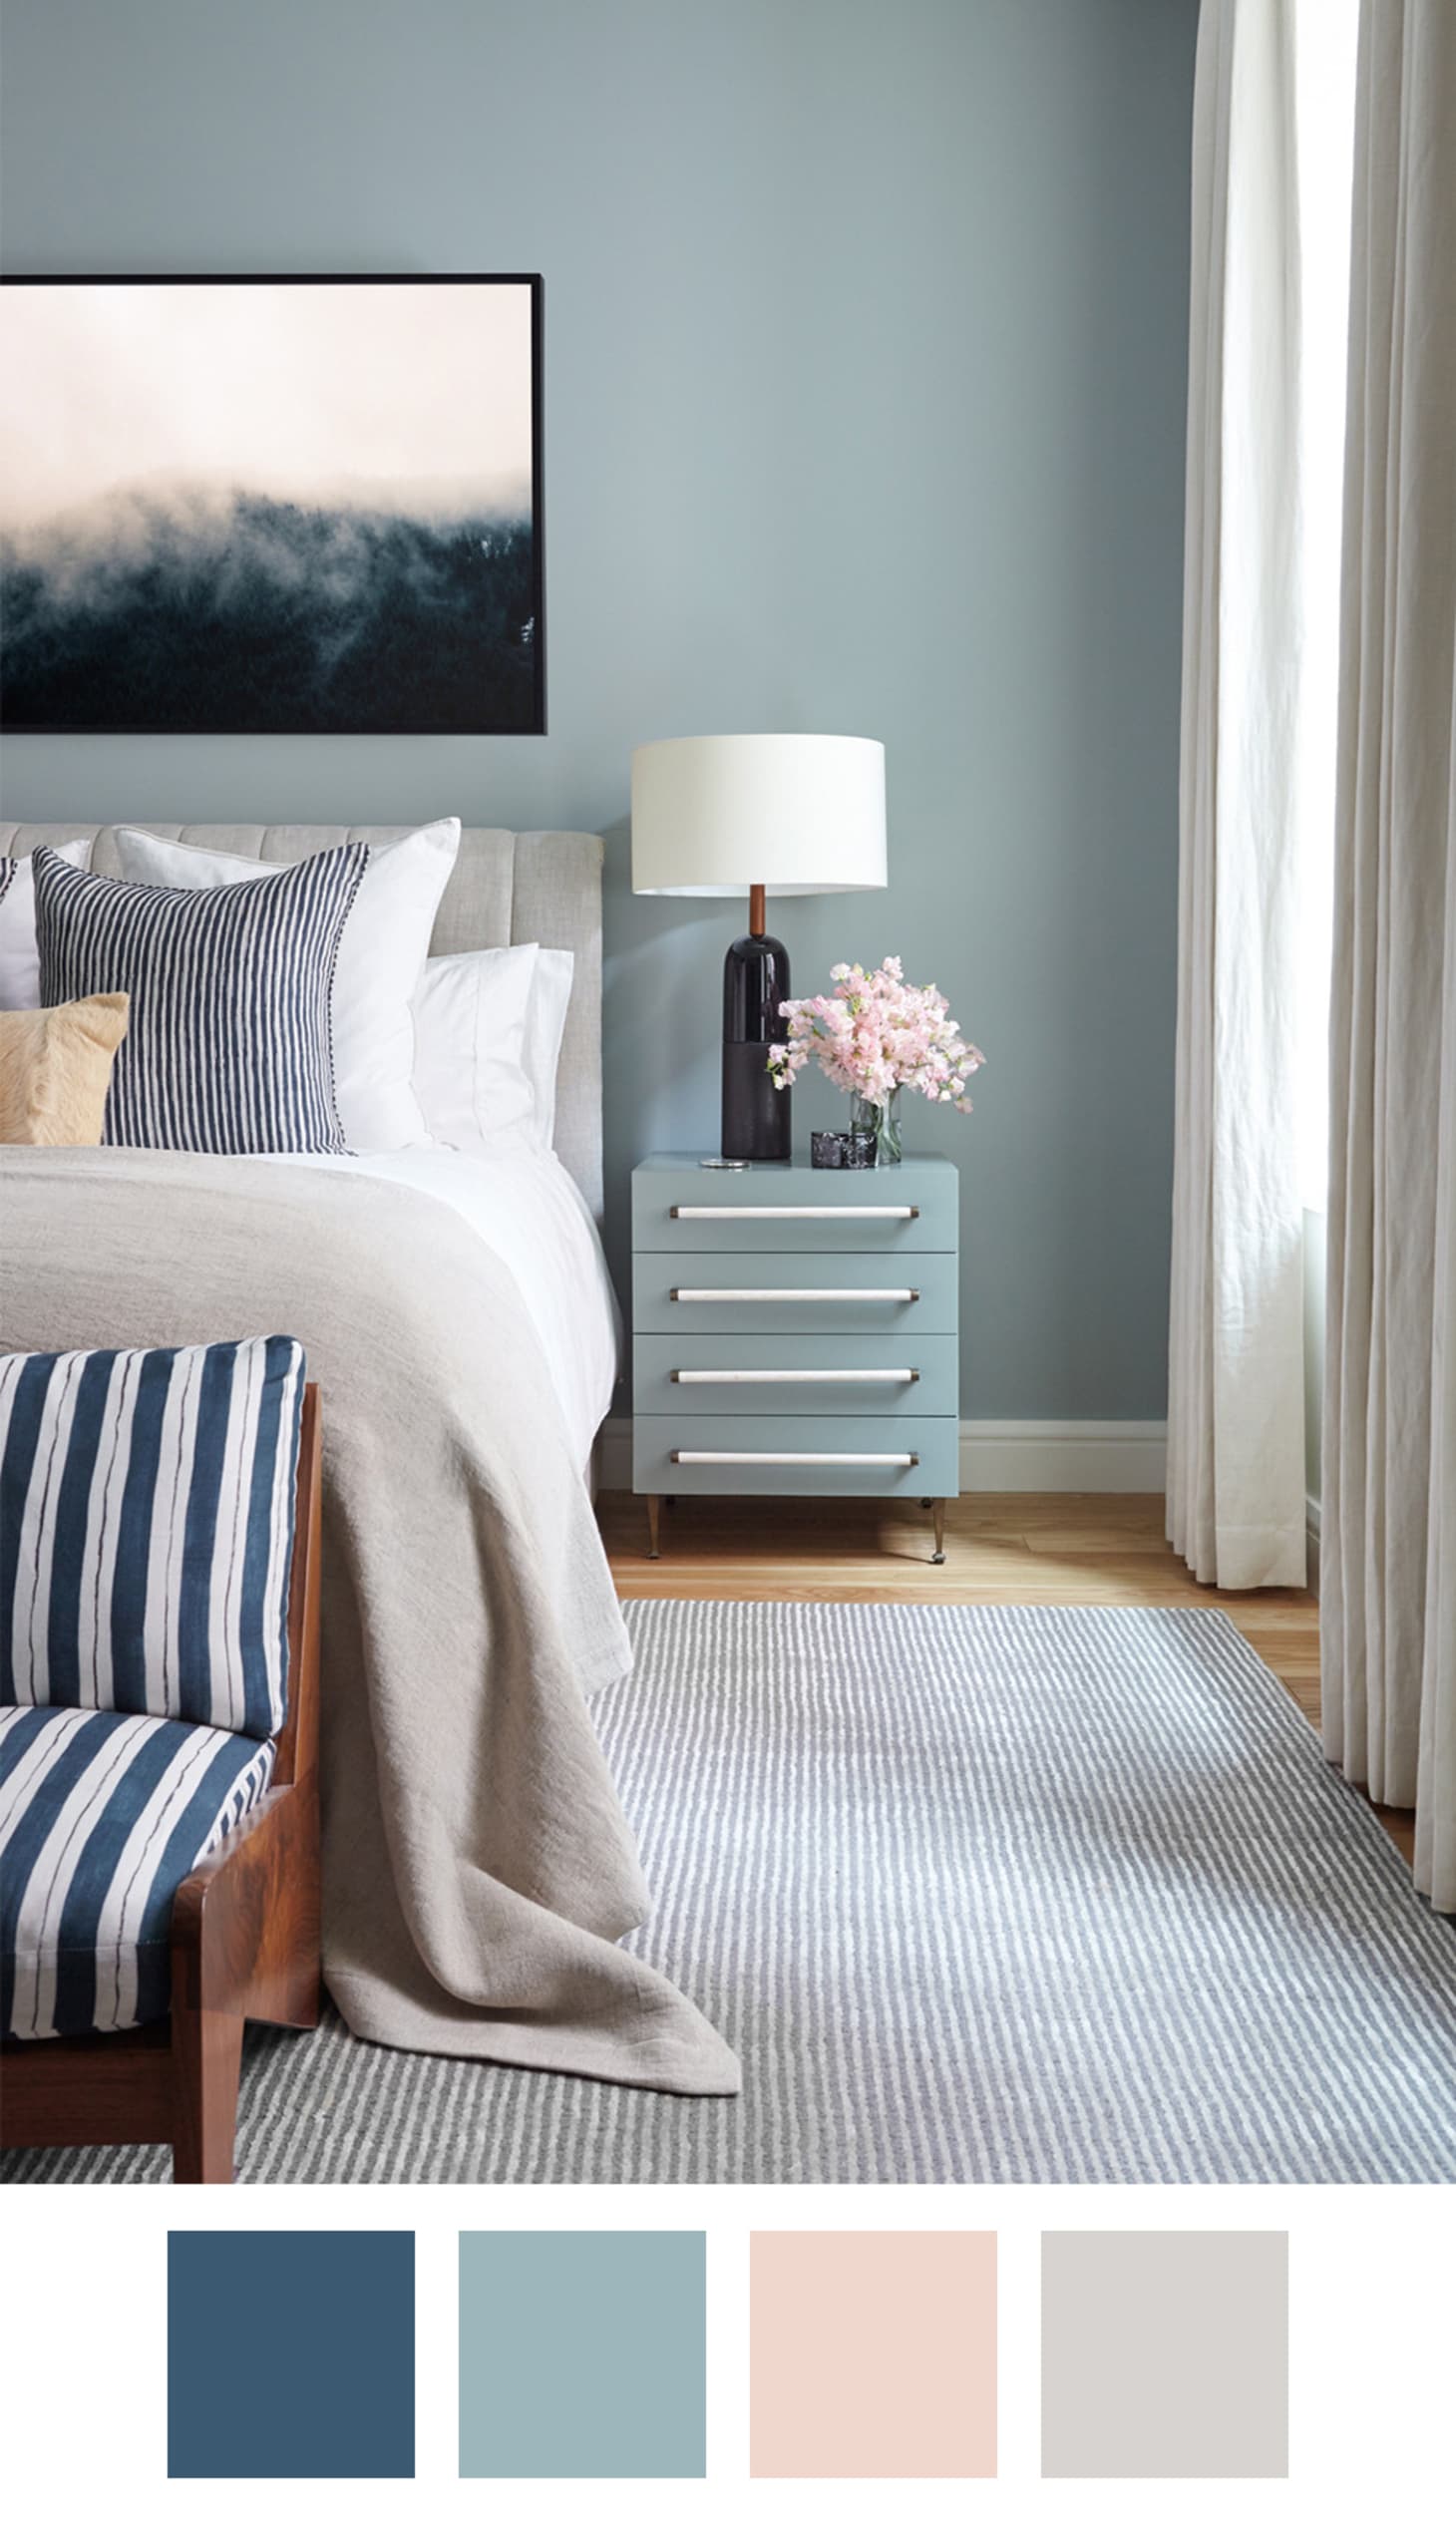 5 Ideas For Colors To Pair With Blue When Decorating